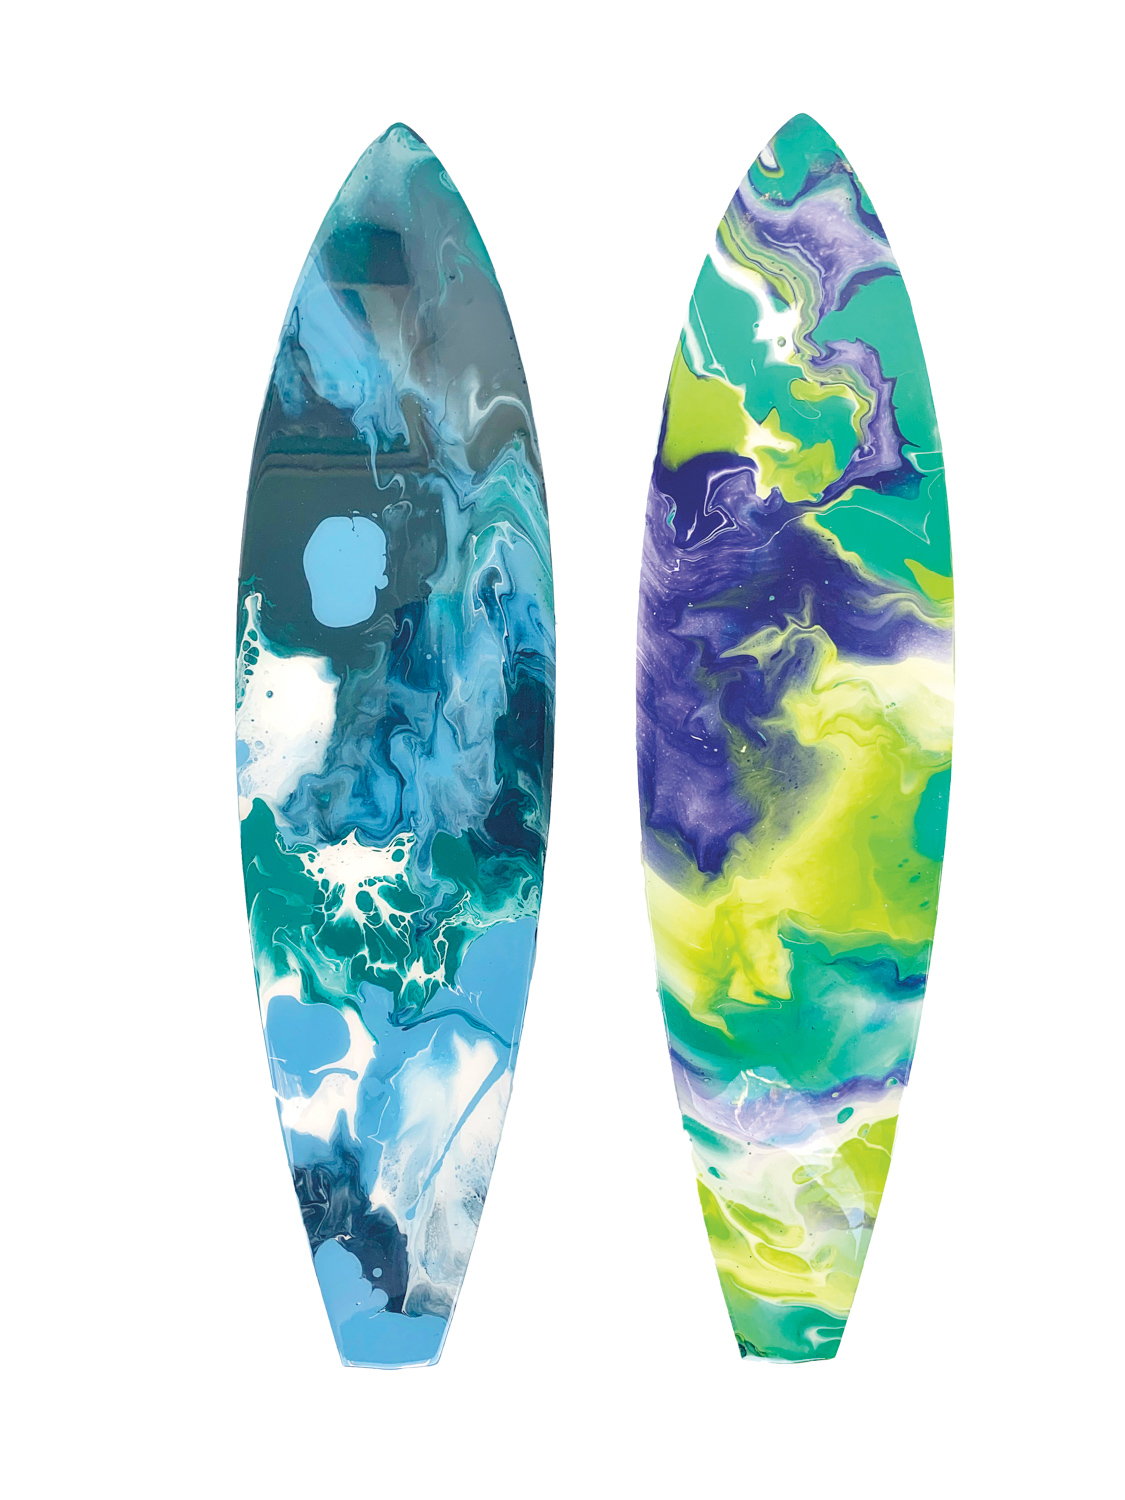 colorful resin surfboards